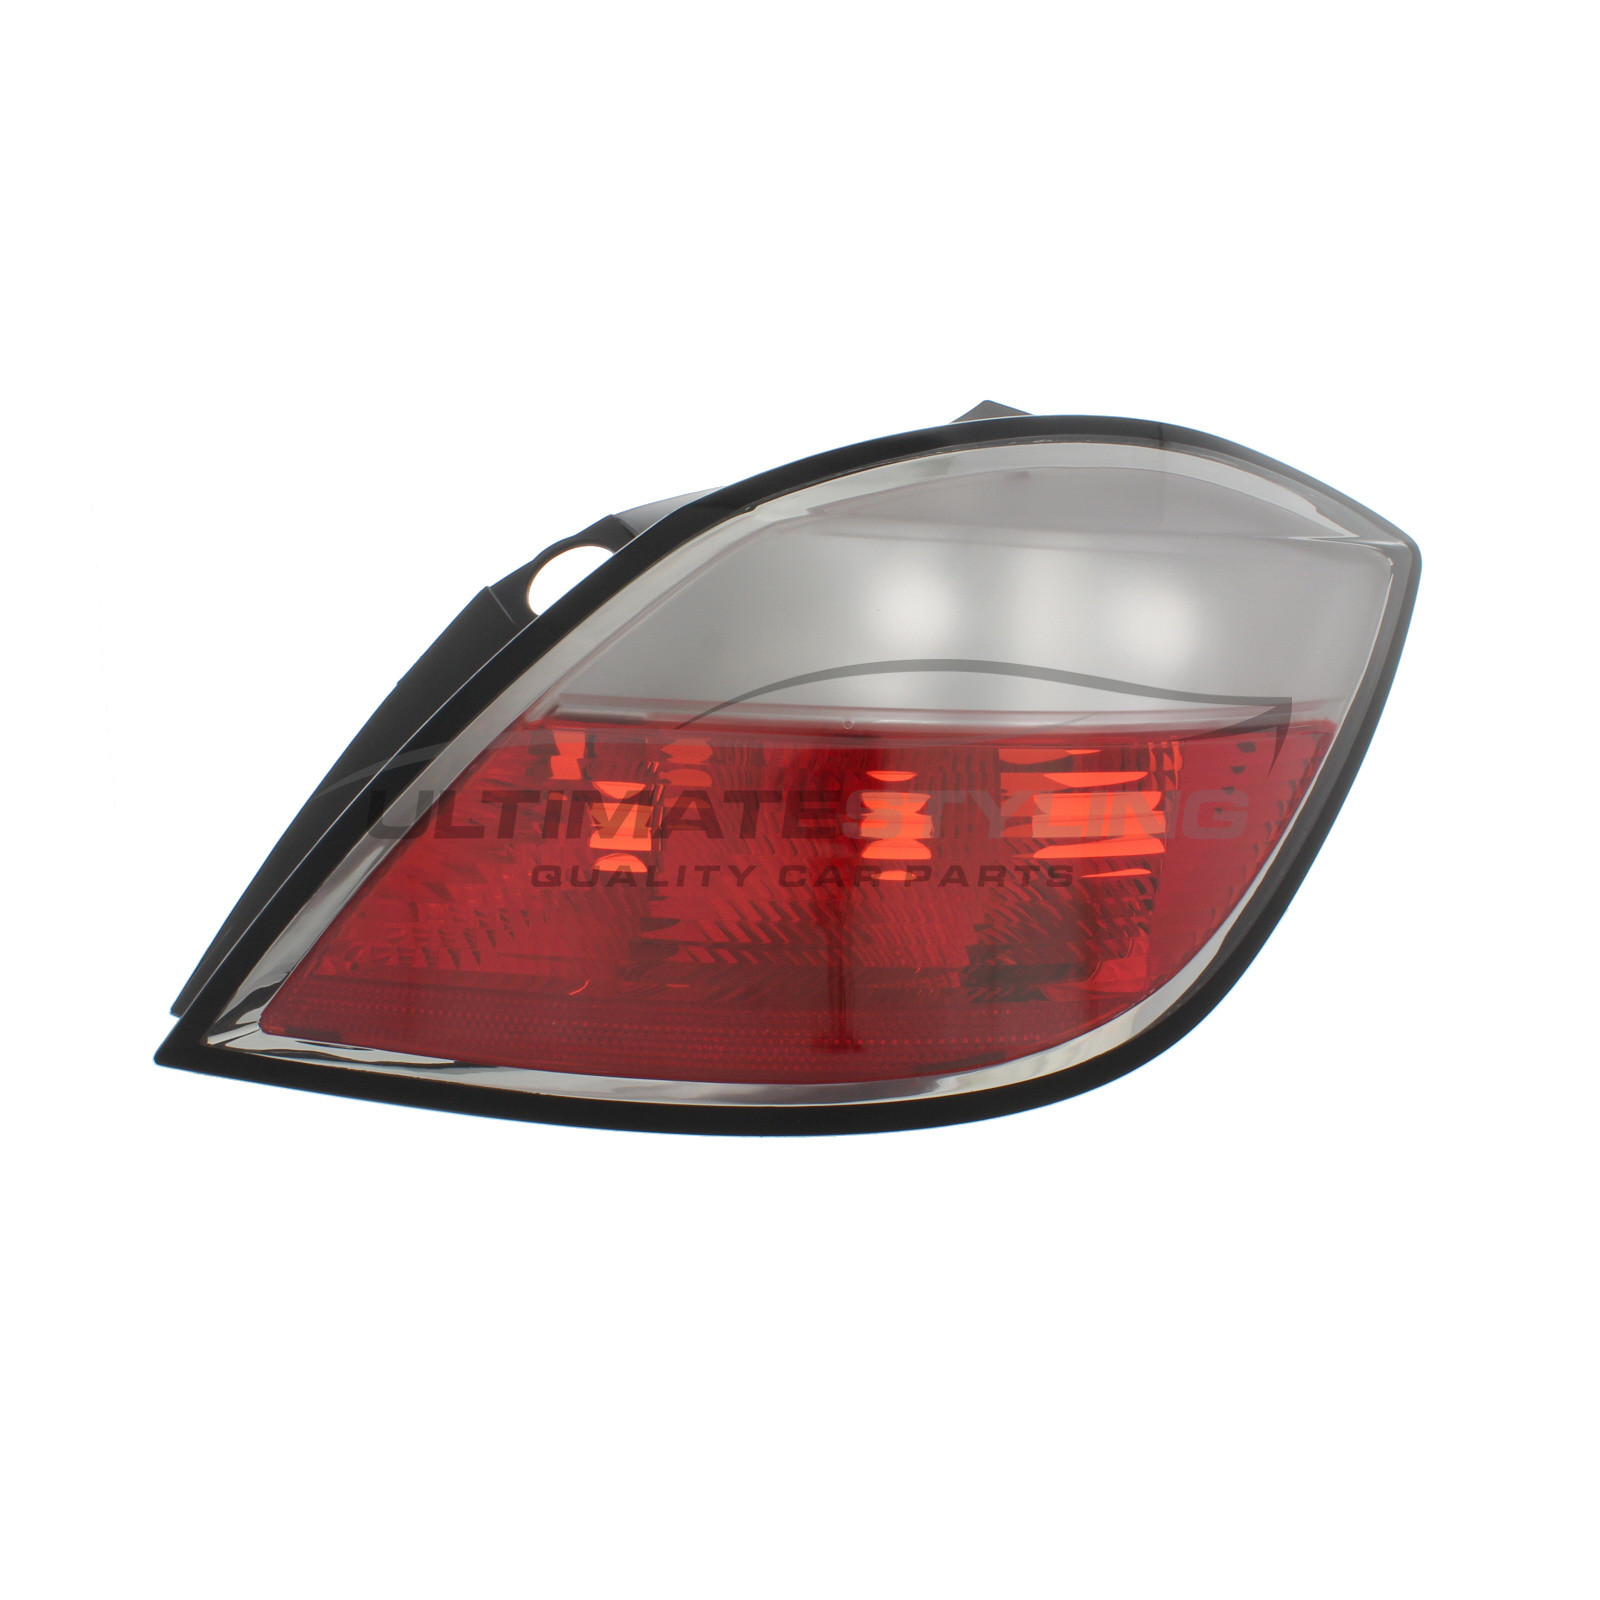 Vauxhall Astra 2004-2007 Non-LED with White Indicator Rear Light / Tail Light Excluding Bulb Holder Drivers Side (RH)